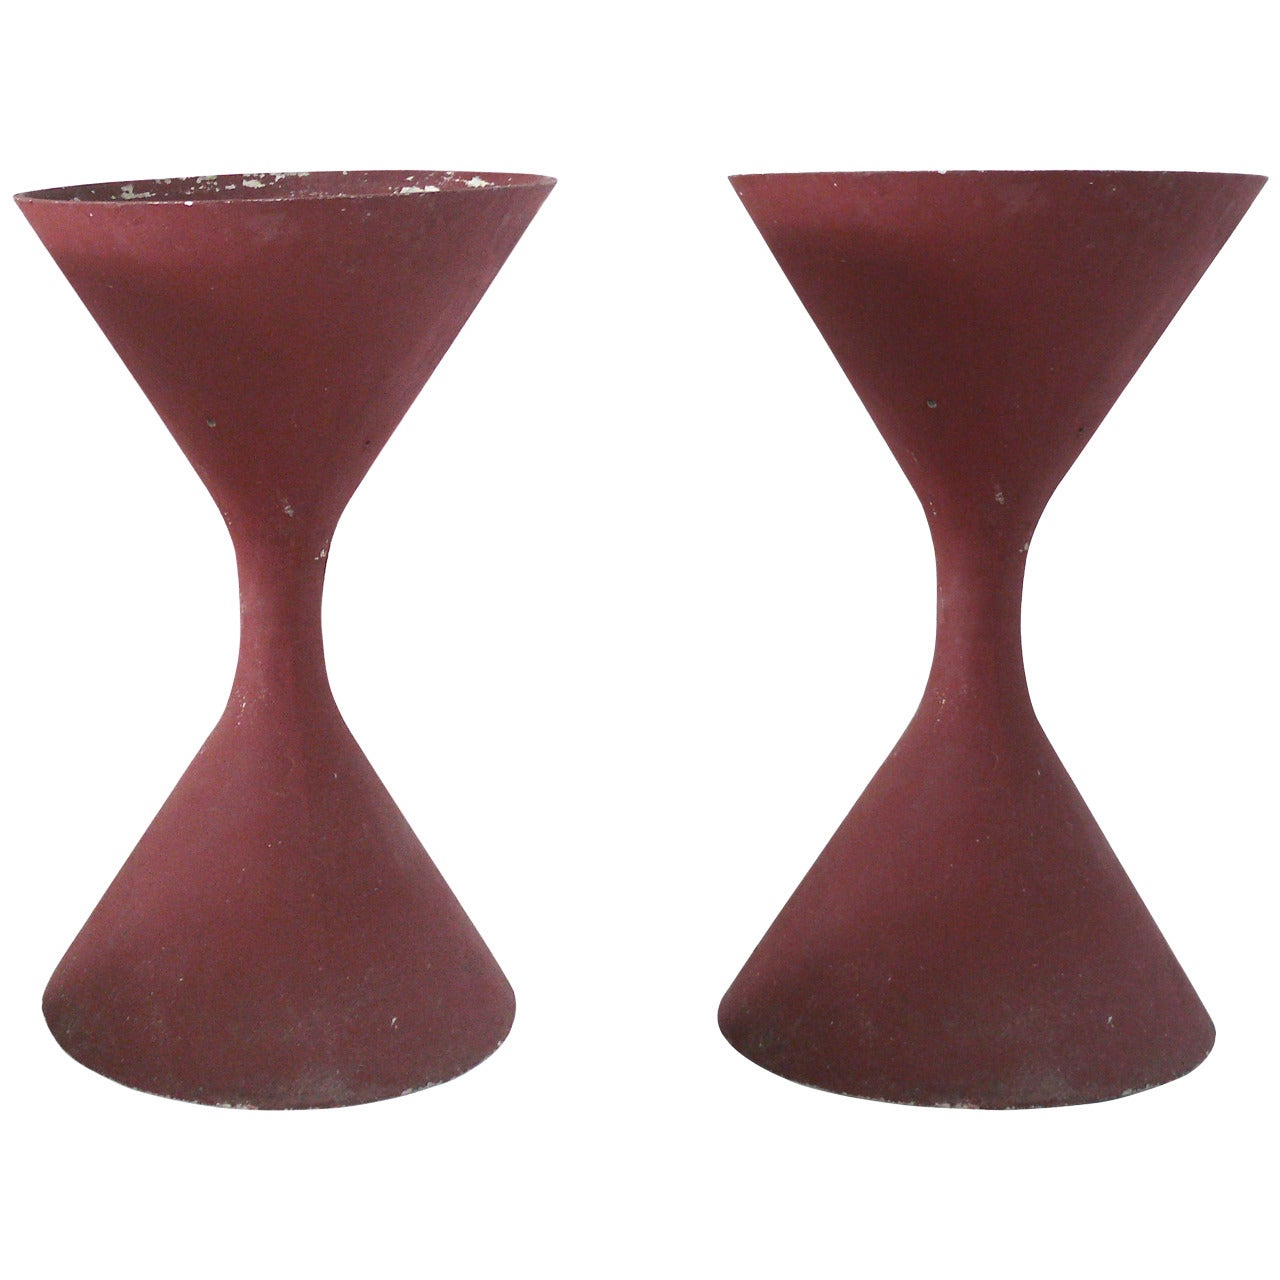 Pair of Architectural Planters by Willy Guhl